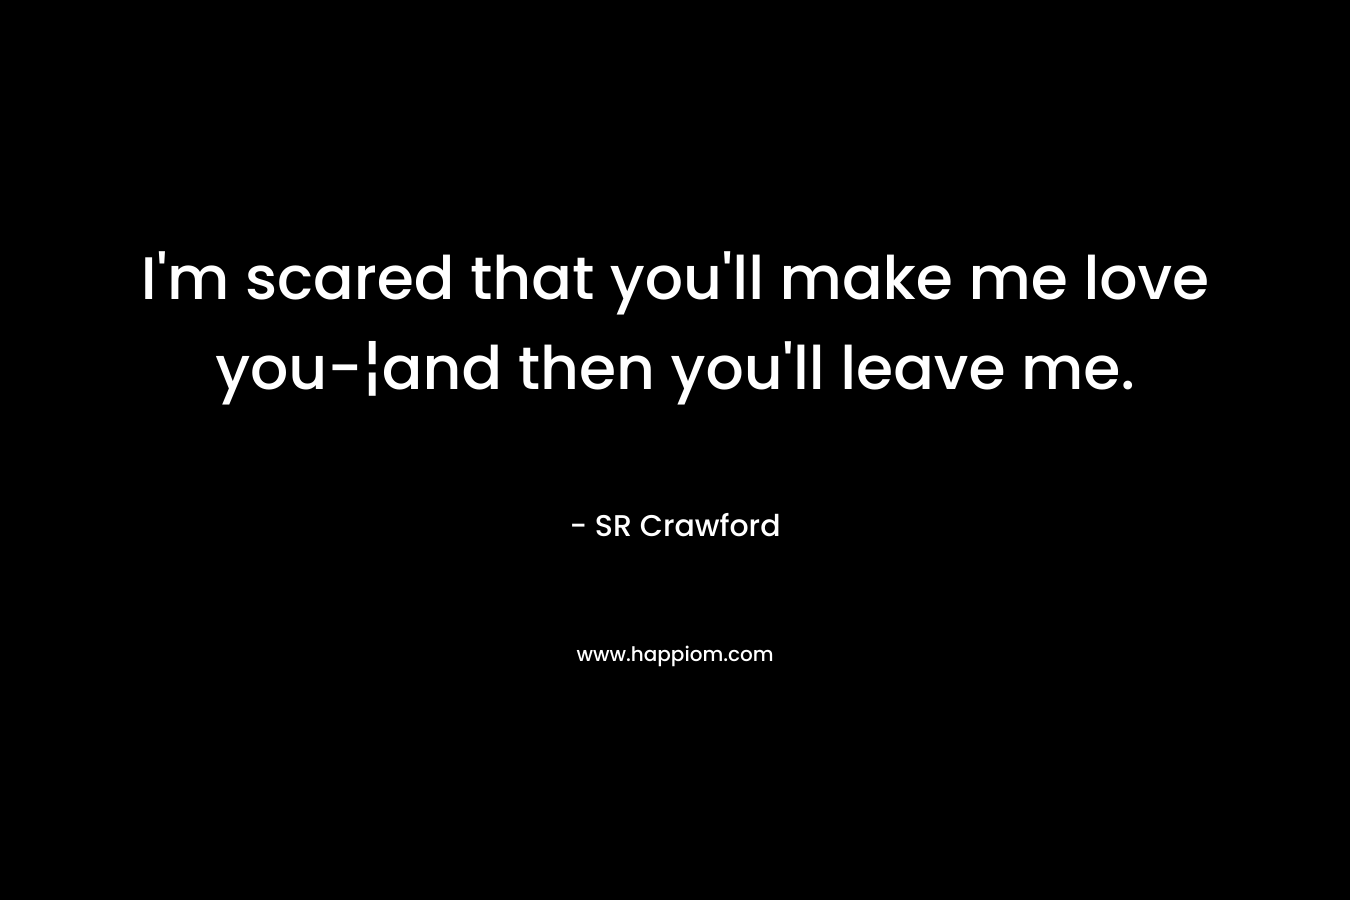 I'm scared that you'll make me love you-¦and then you'll leave me.